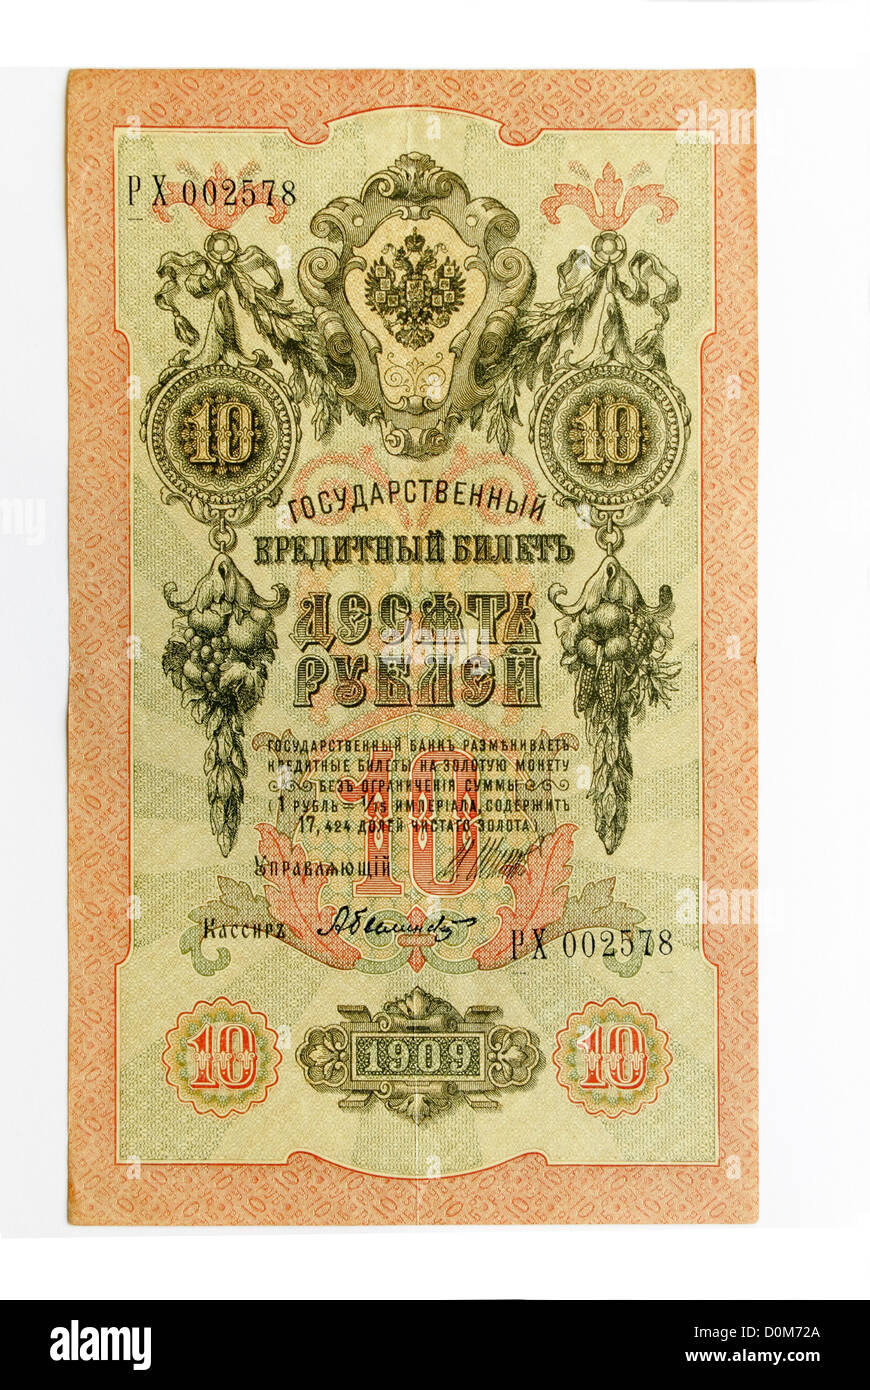 10 ten  Rouble Ruble Imperialist Russian banknote 1909 issue Stock Photo